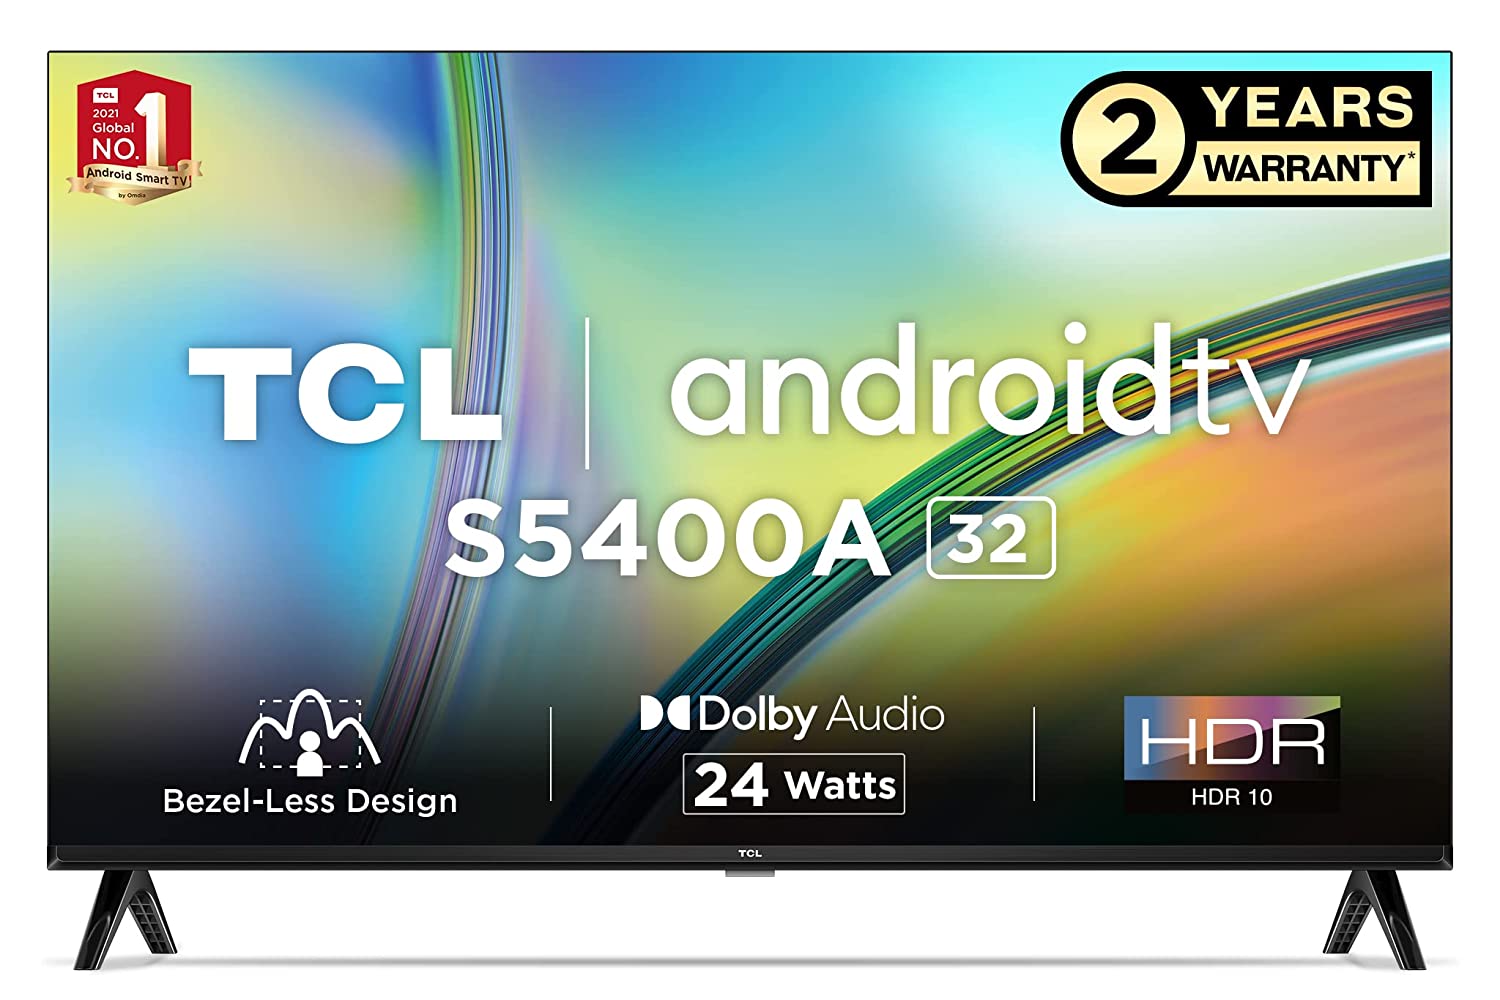 Smart TV TCL  32S5400A (Model 2023) 32" (80CM), LED HD, Brushed dark metal front, Flat, Android TV, Mirroring iOS/Android, IPQ 2.0 Engine, HDR10/Dolby Digital Plus/Dolby Audio, Refresh rate: 50/60Hz+FRC, Tuner: DVB-T2/C/S2,  speakers 2x5W, Wi-Fi/Bluetooth SBC / 5.0, 1x Jack 3.5 mm/2x USB 3.0/1x